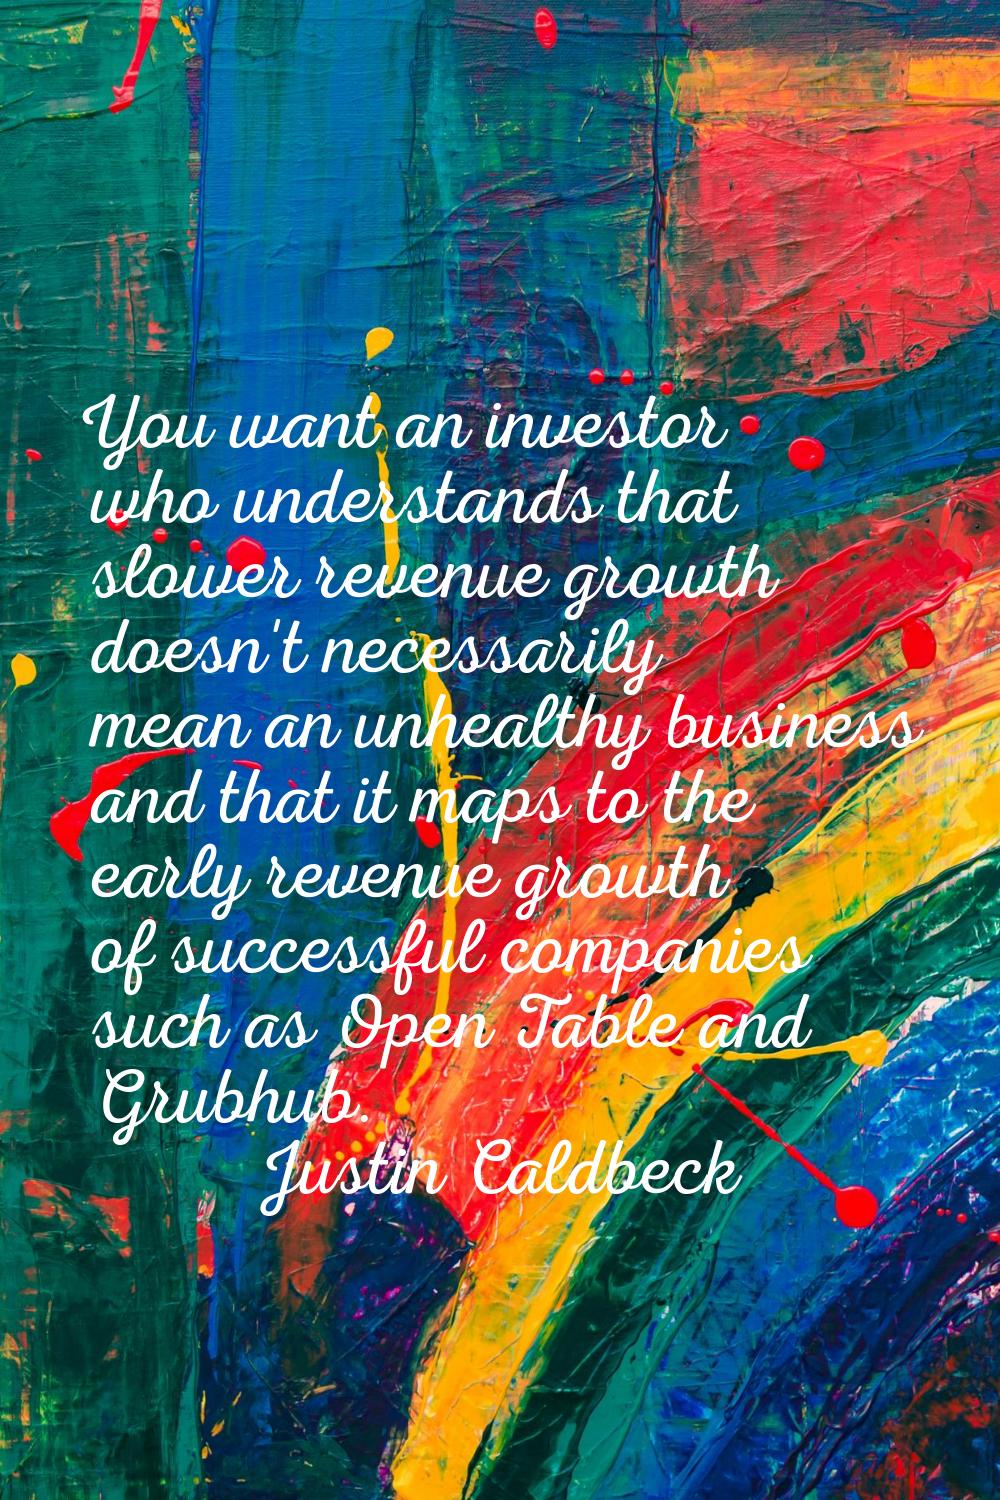 You want an investor who understands that slower revenue growth doesn't necessarily mean an unhealt